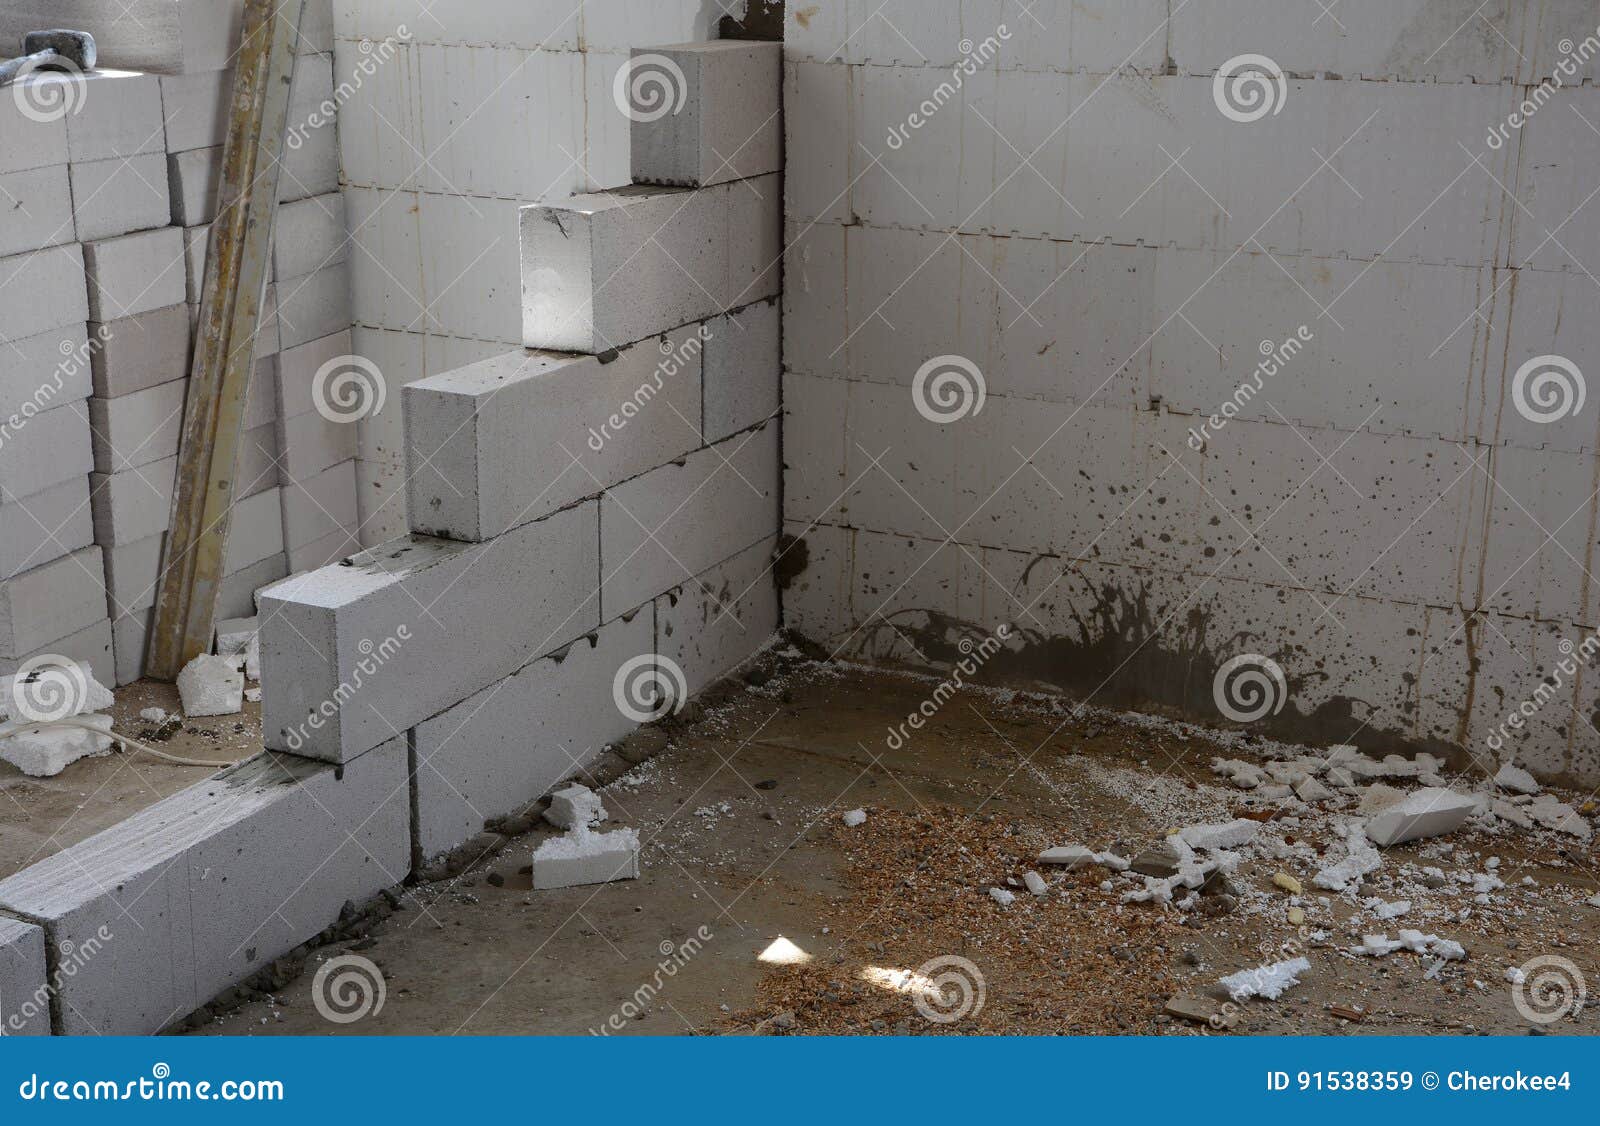 unfinished house wall made from aerated concrete blocks